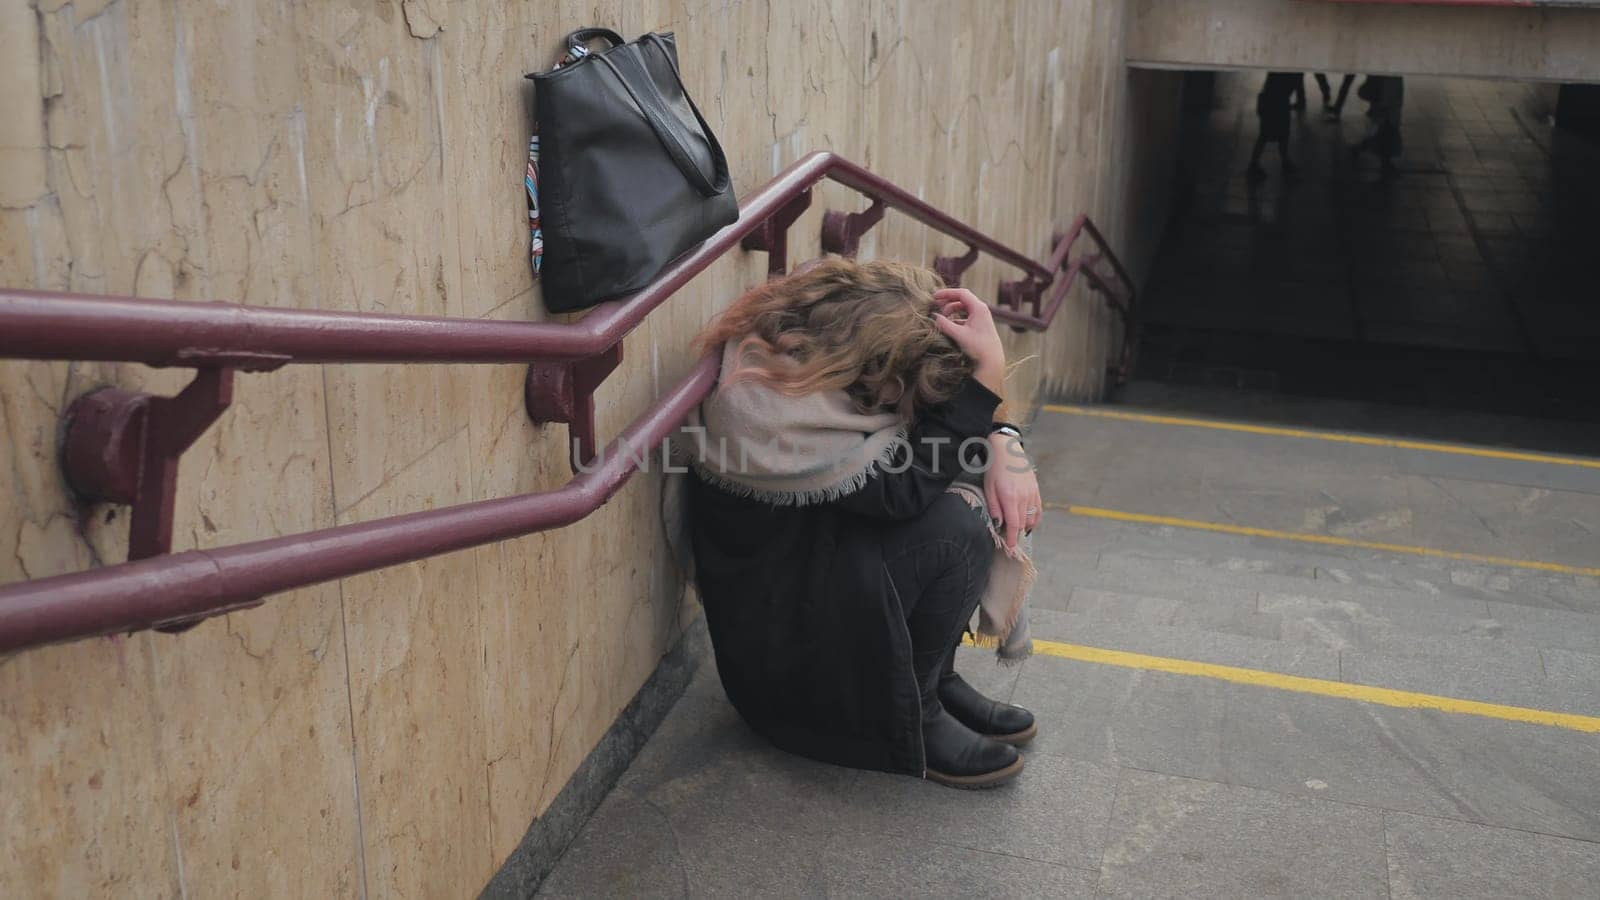 A young girl crying by the stairs in the subway